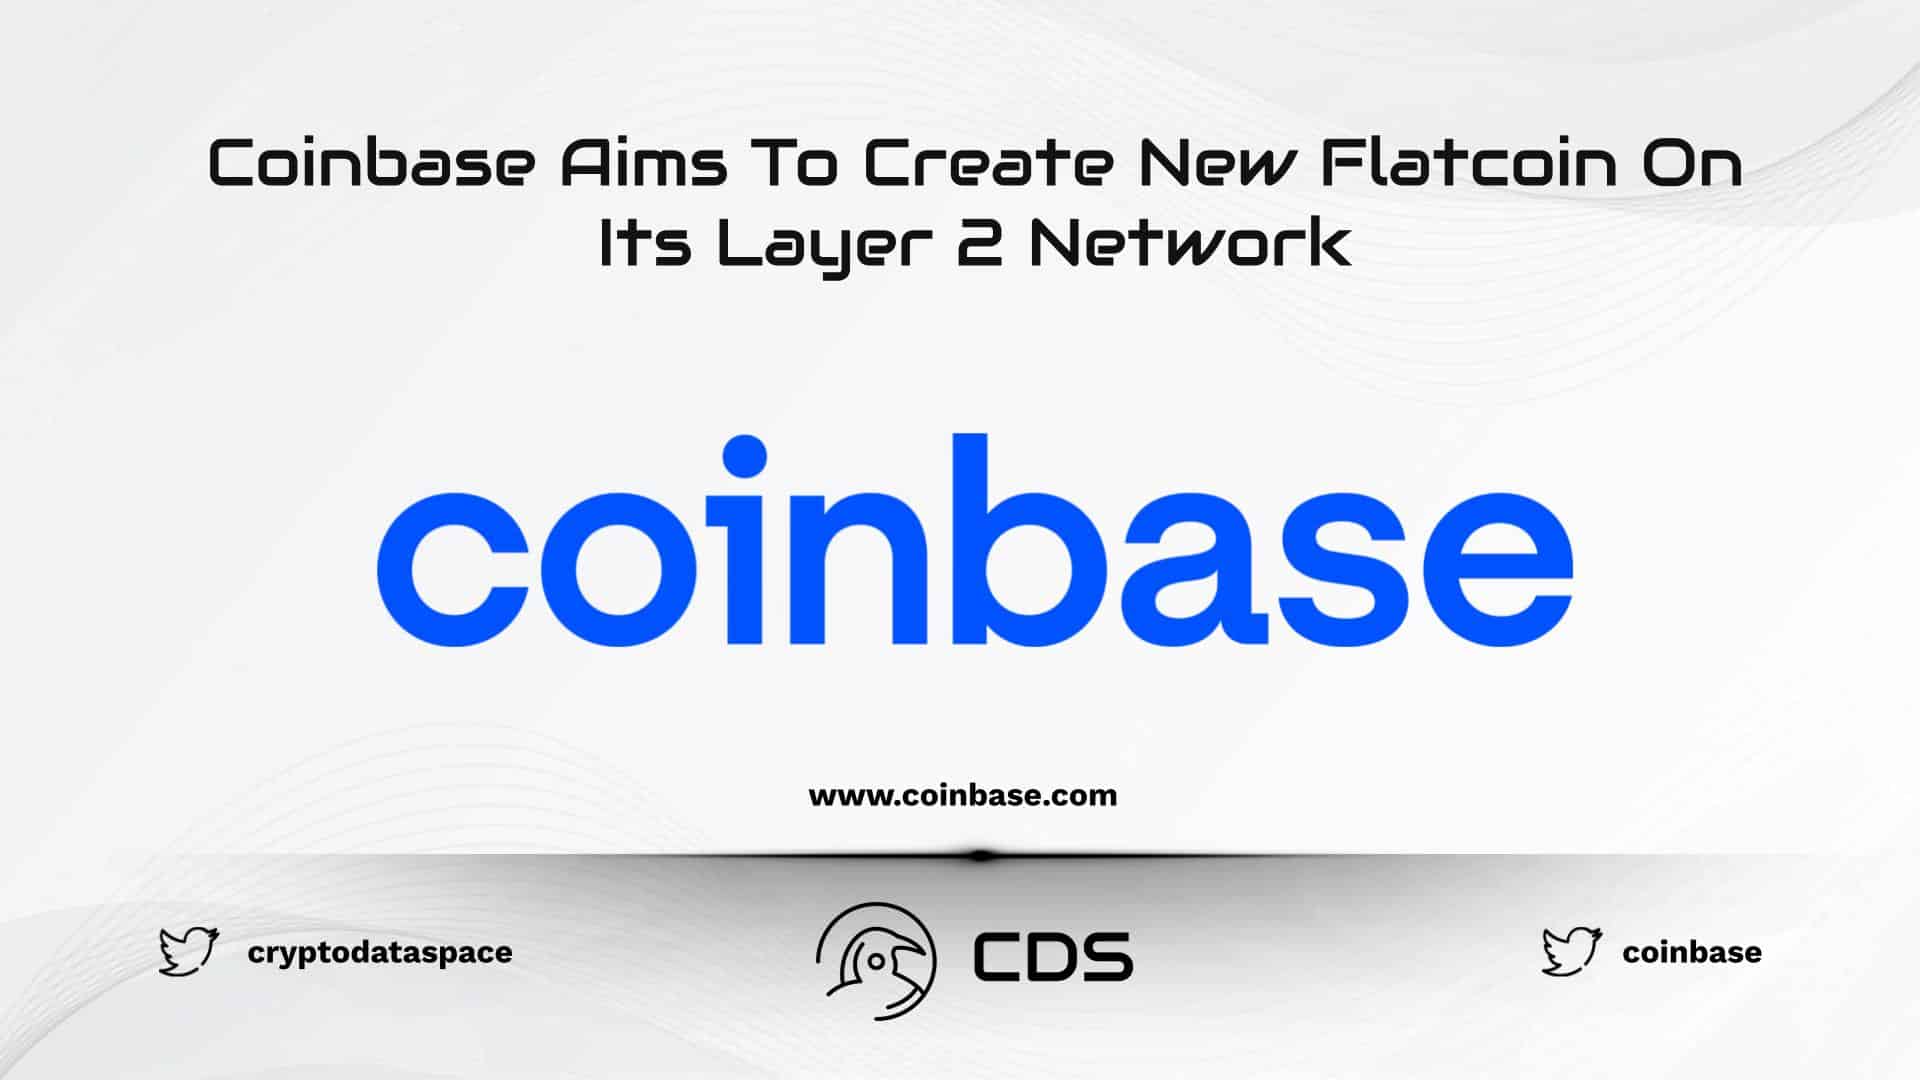 Coinbase Aims To Create New Flatcoin On Its Layer 2 Network